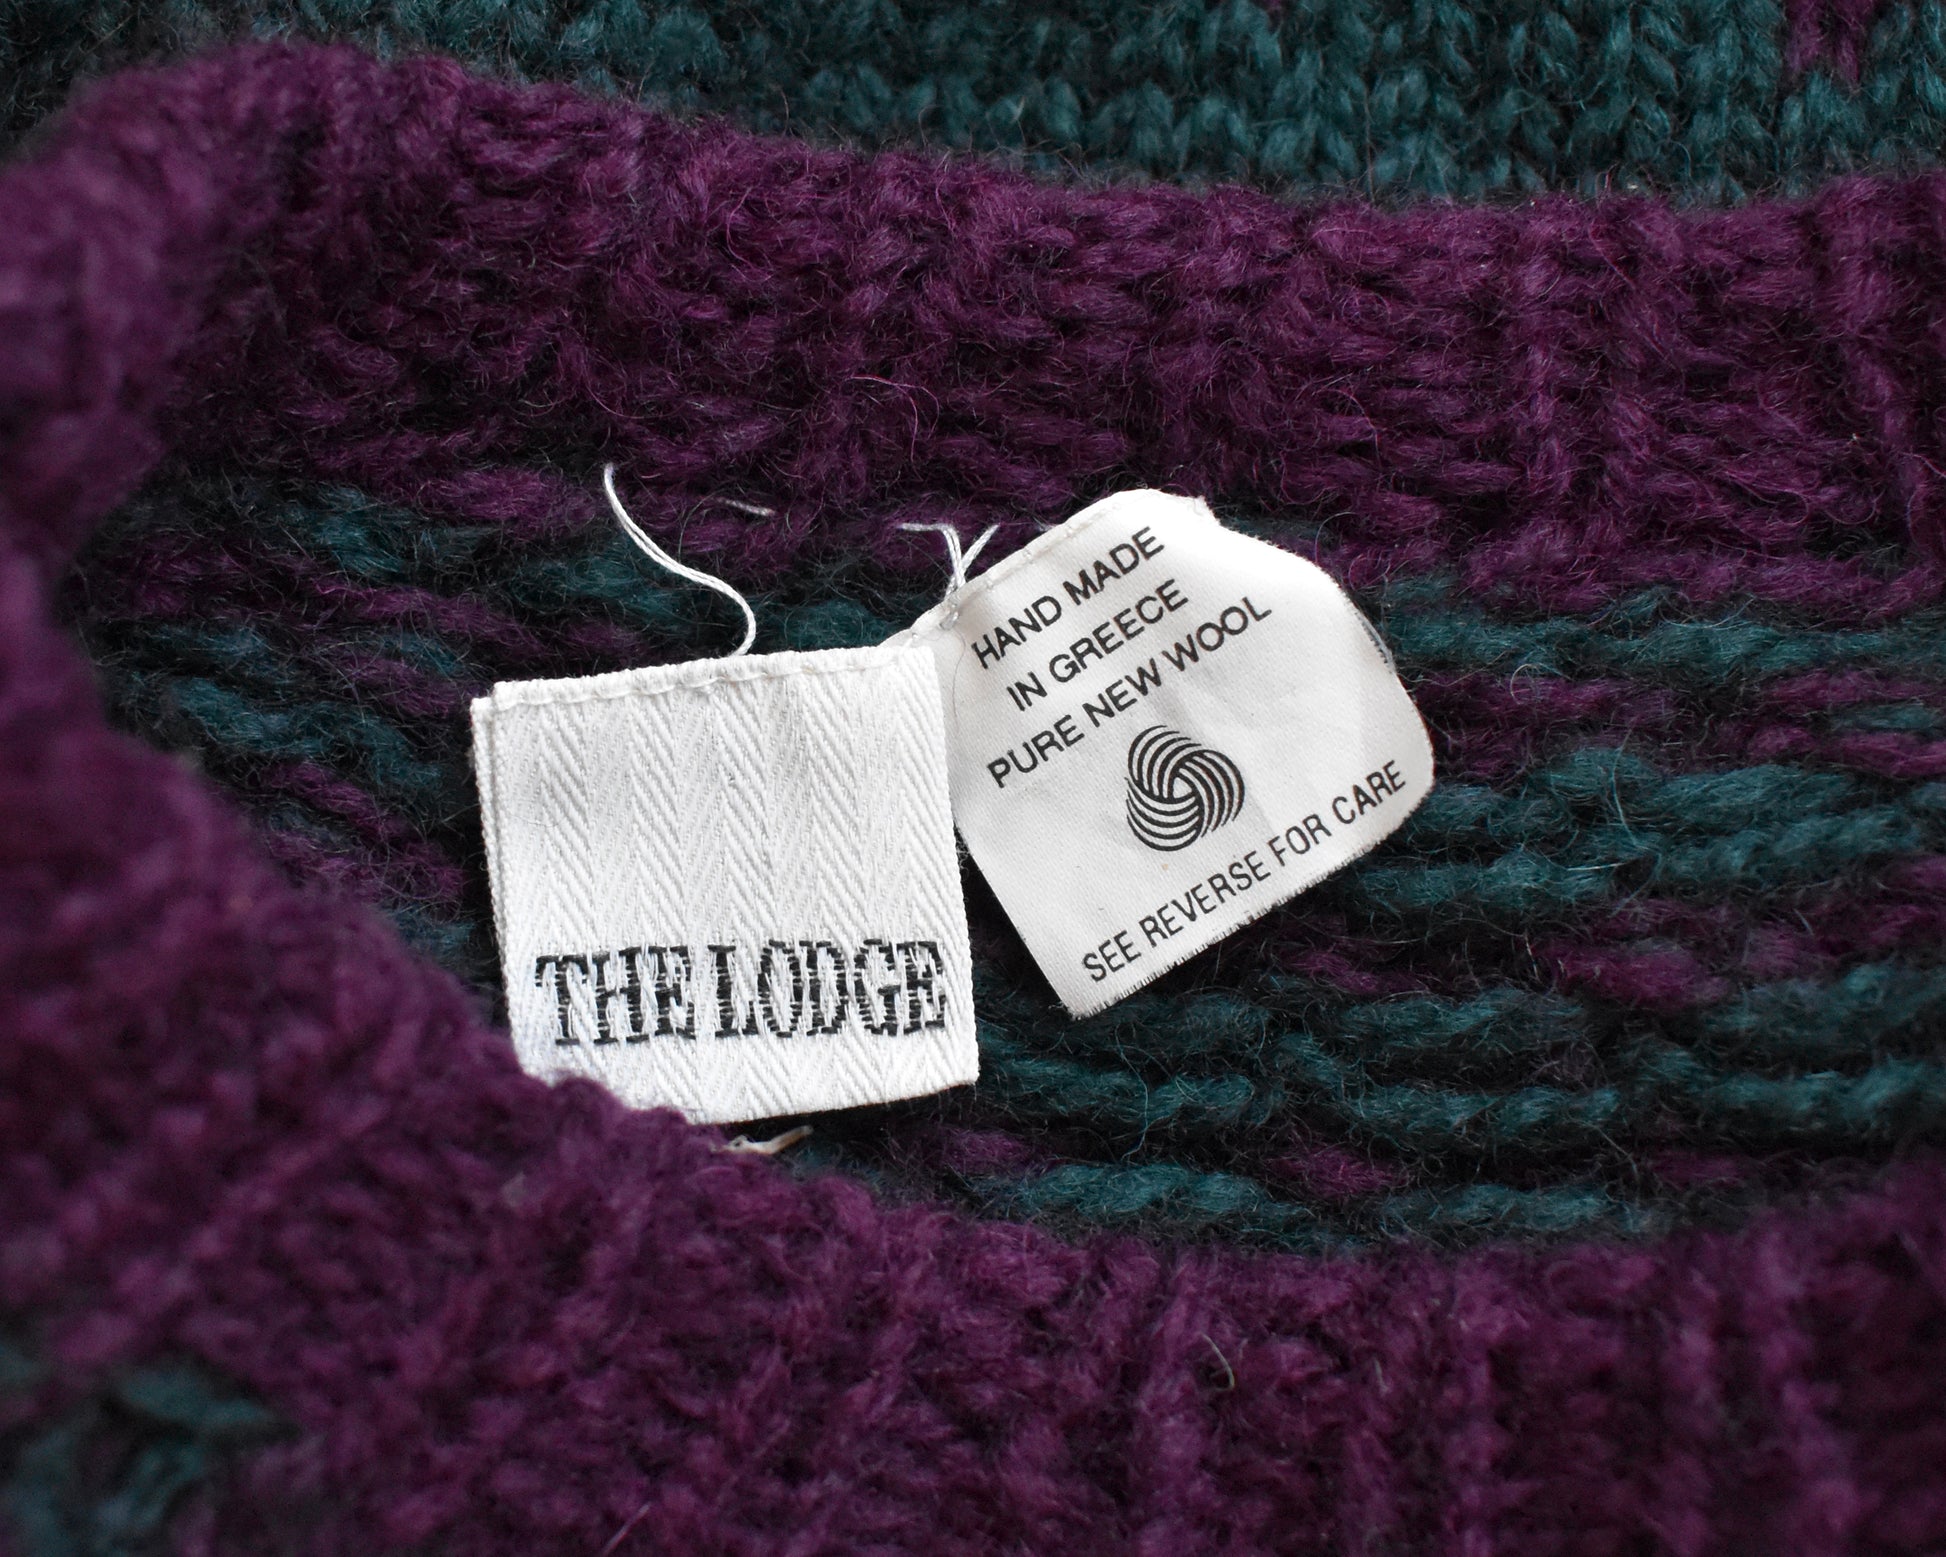 Close up of the tag which says The Lodge and Hand made in Greece Pure New Wool